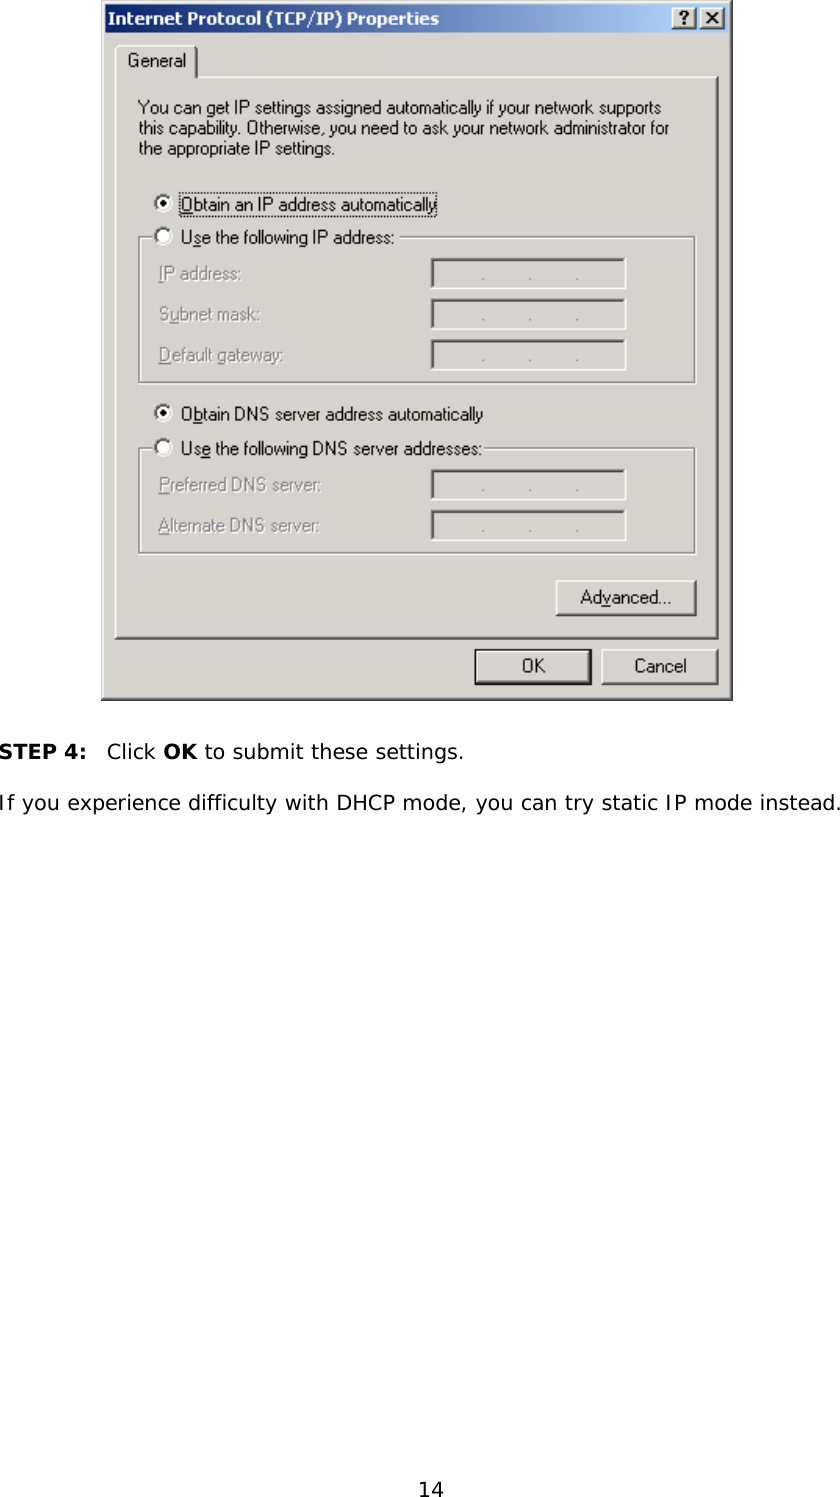  14     STEP 4:  Click OK to submit these settings.  If you experience difficulty with DHCP mode, you can try static IP mode instead.  